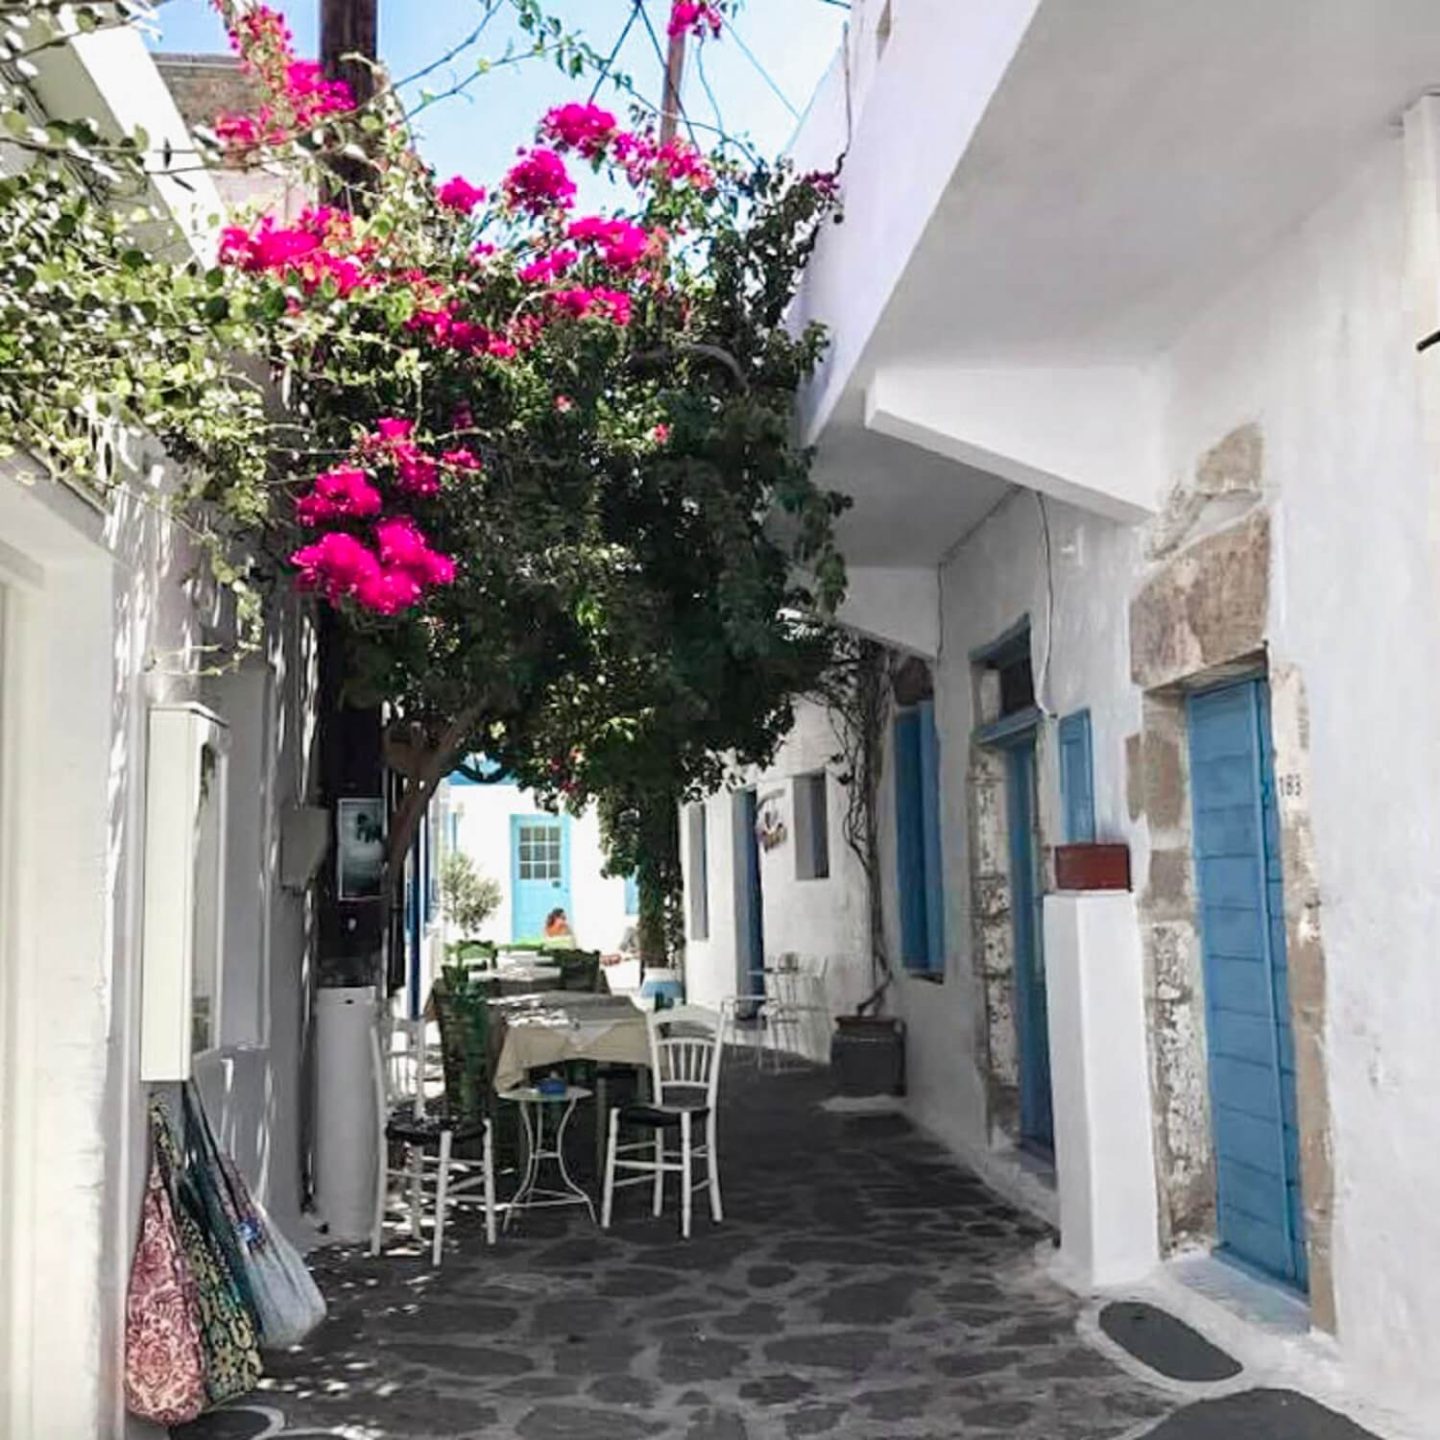 What to see in Paros